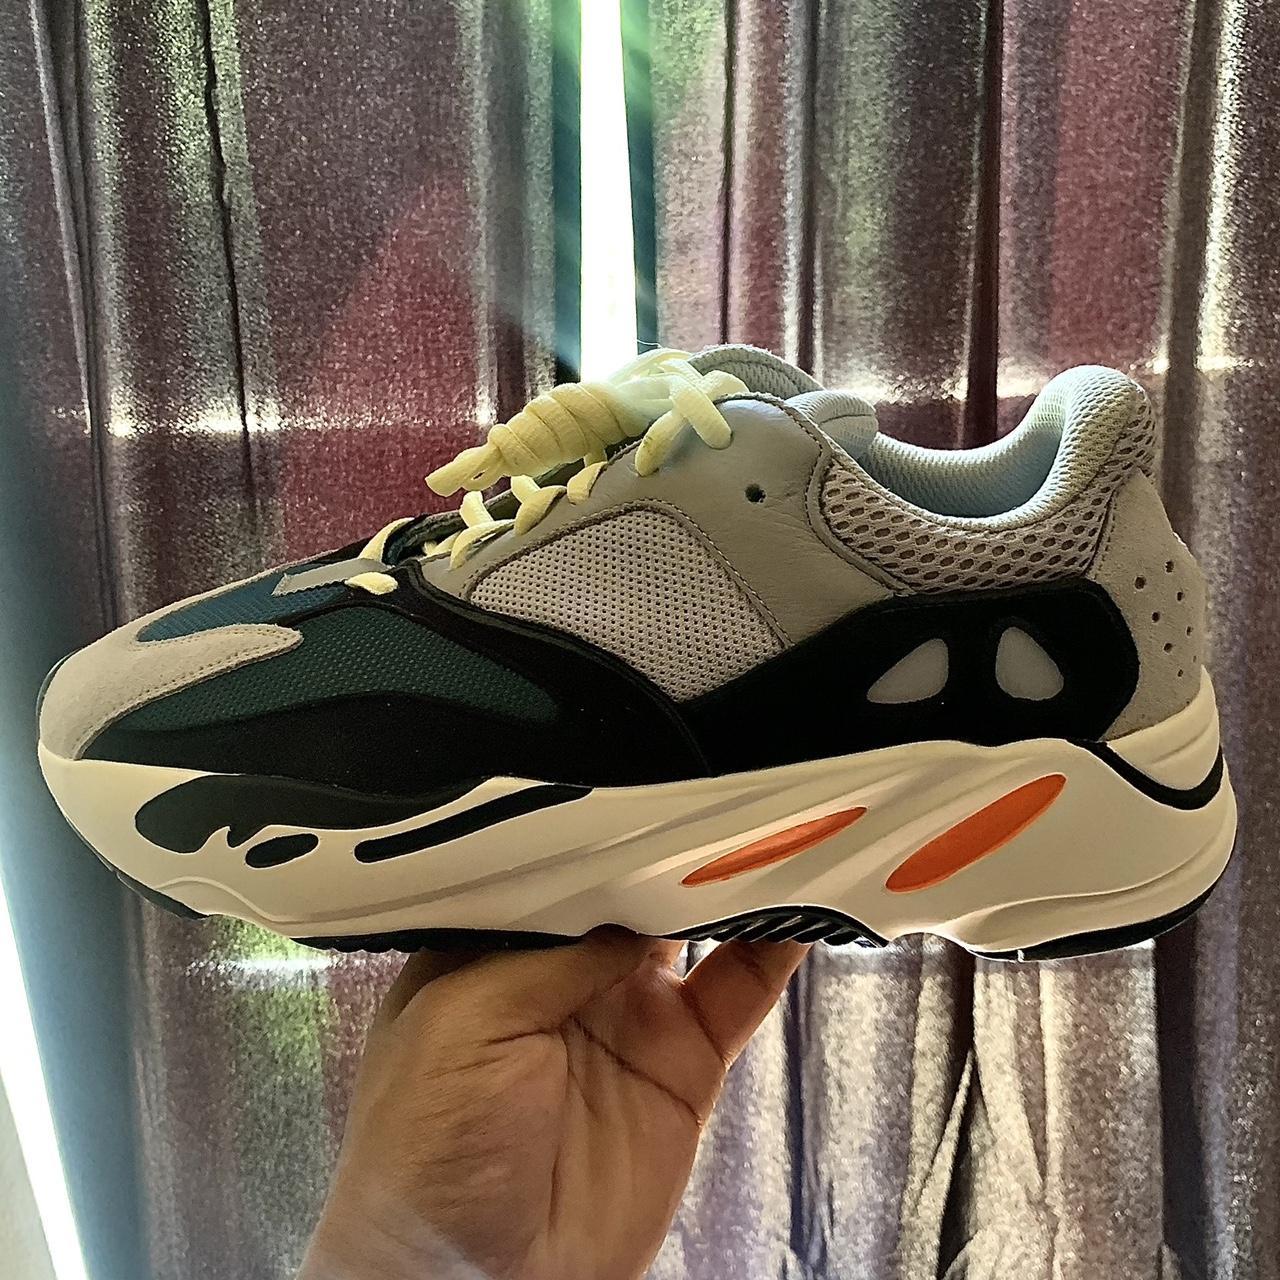 Brand new YZY 700 Wave Runner Will ship as soon as... - Depop